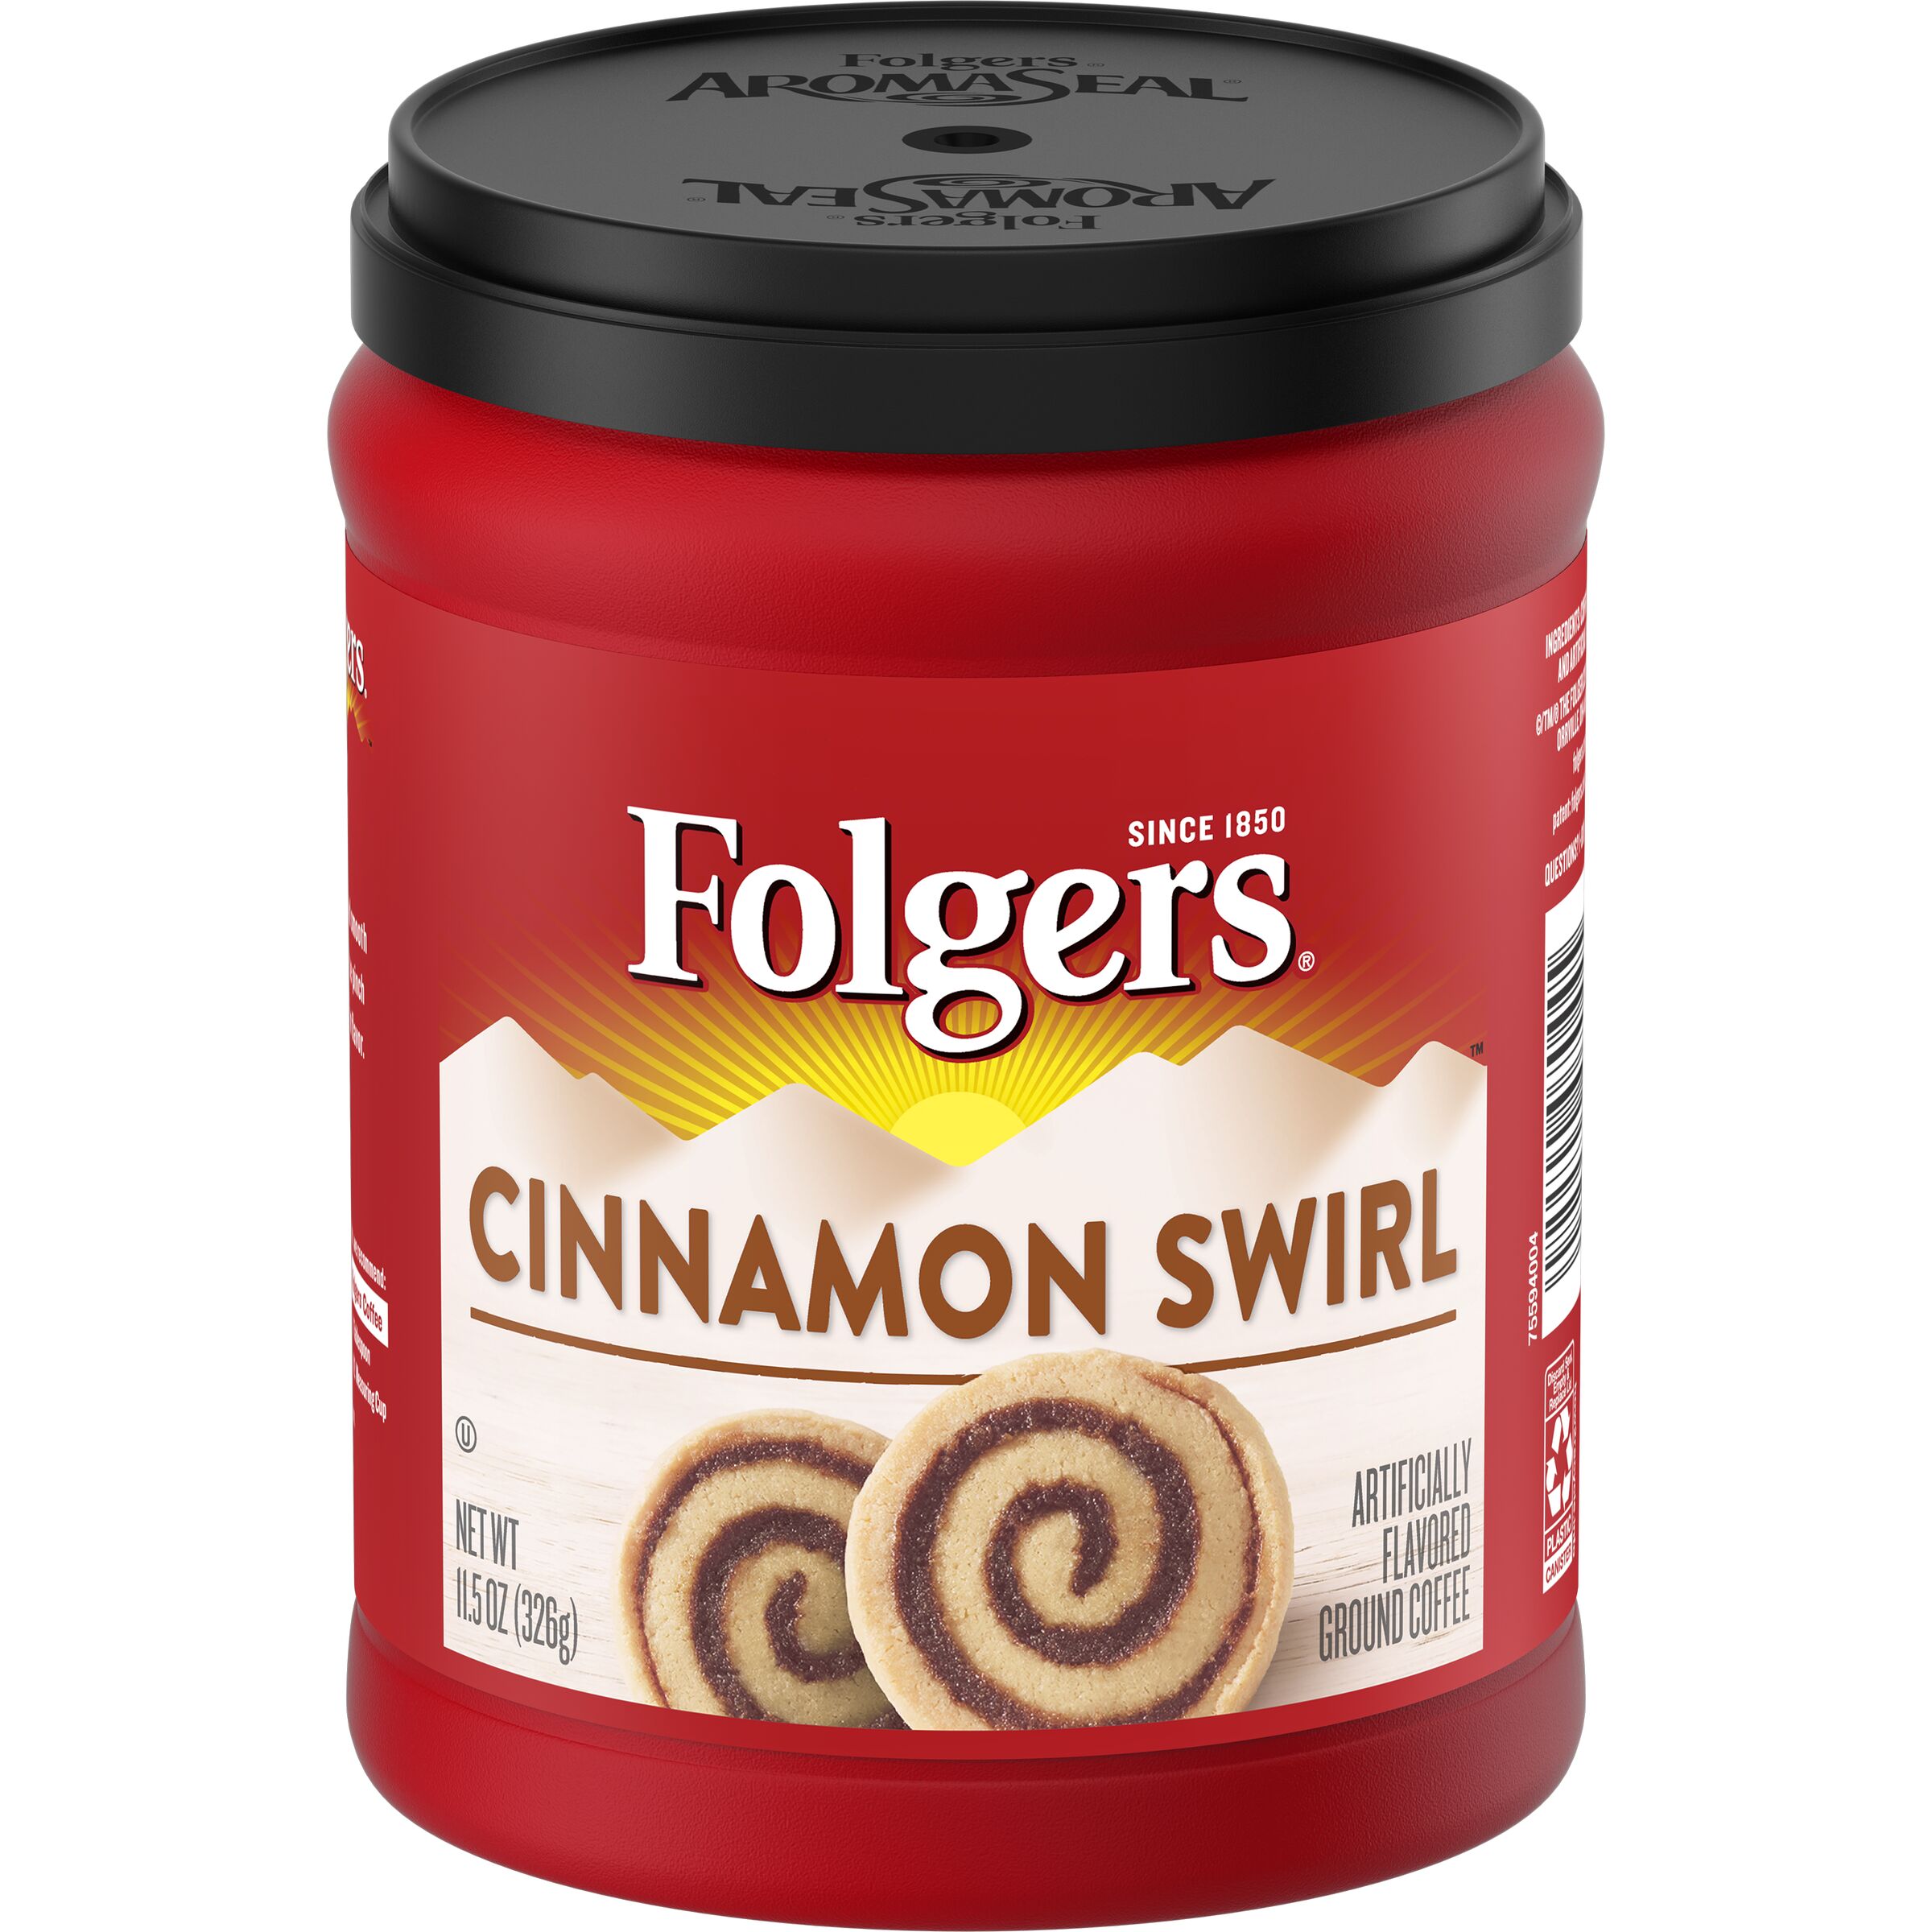 Folgers Cinnamon Swirl Artificially Flavored Ground Coffee, 11.5-Ounce - image 1 of 6